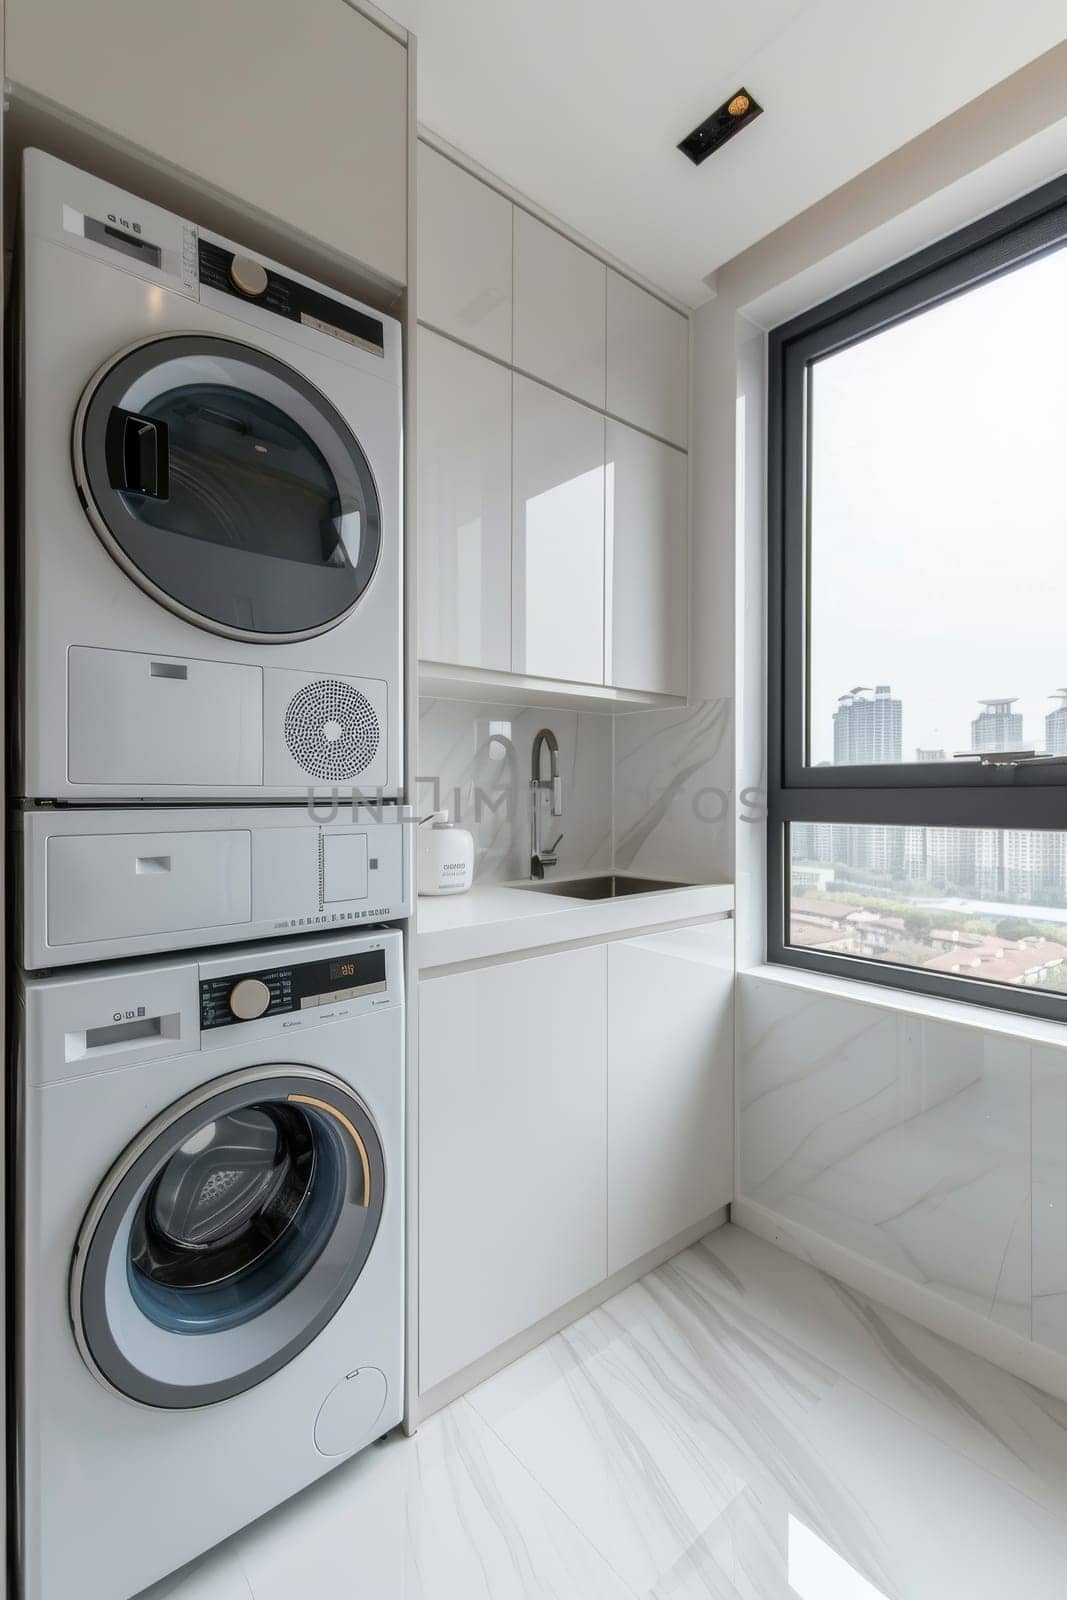 A small kitchen with a white washer and dryer. The washer is on the left side of the room and the dryer is on the right. The room has a modern and clean look